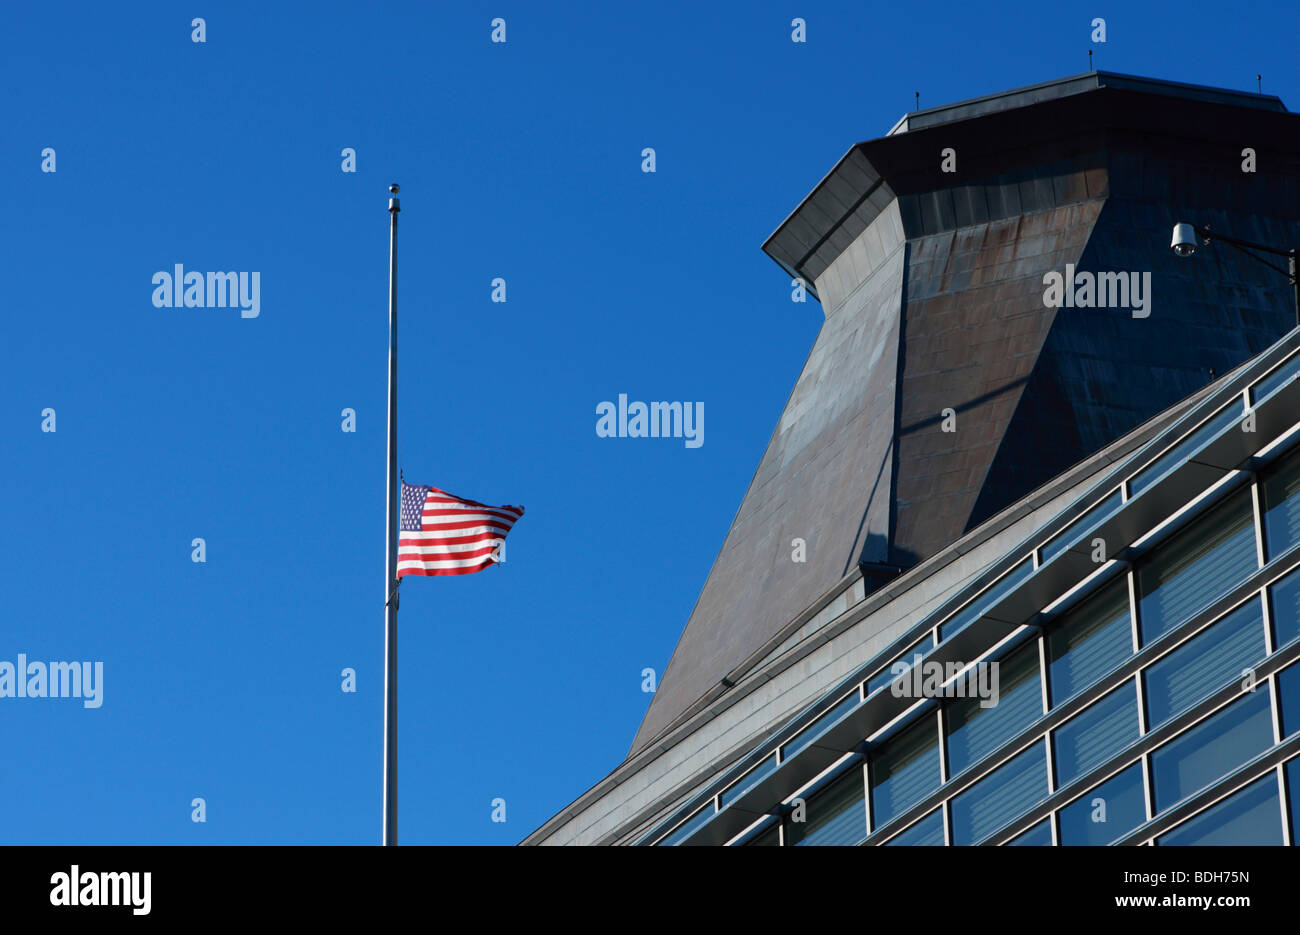 The flag was flown at half-mast on the United States Embassy building ...